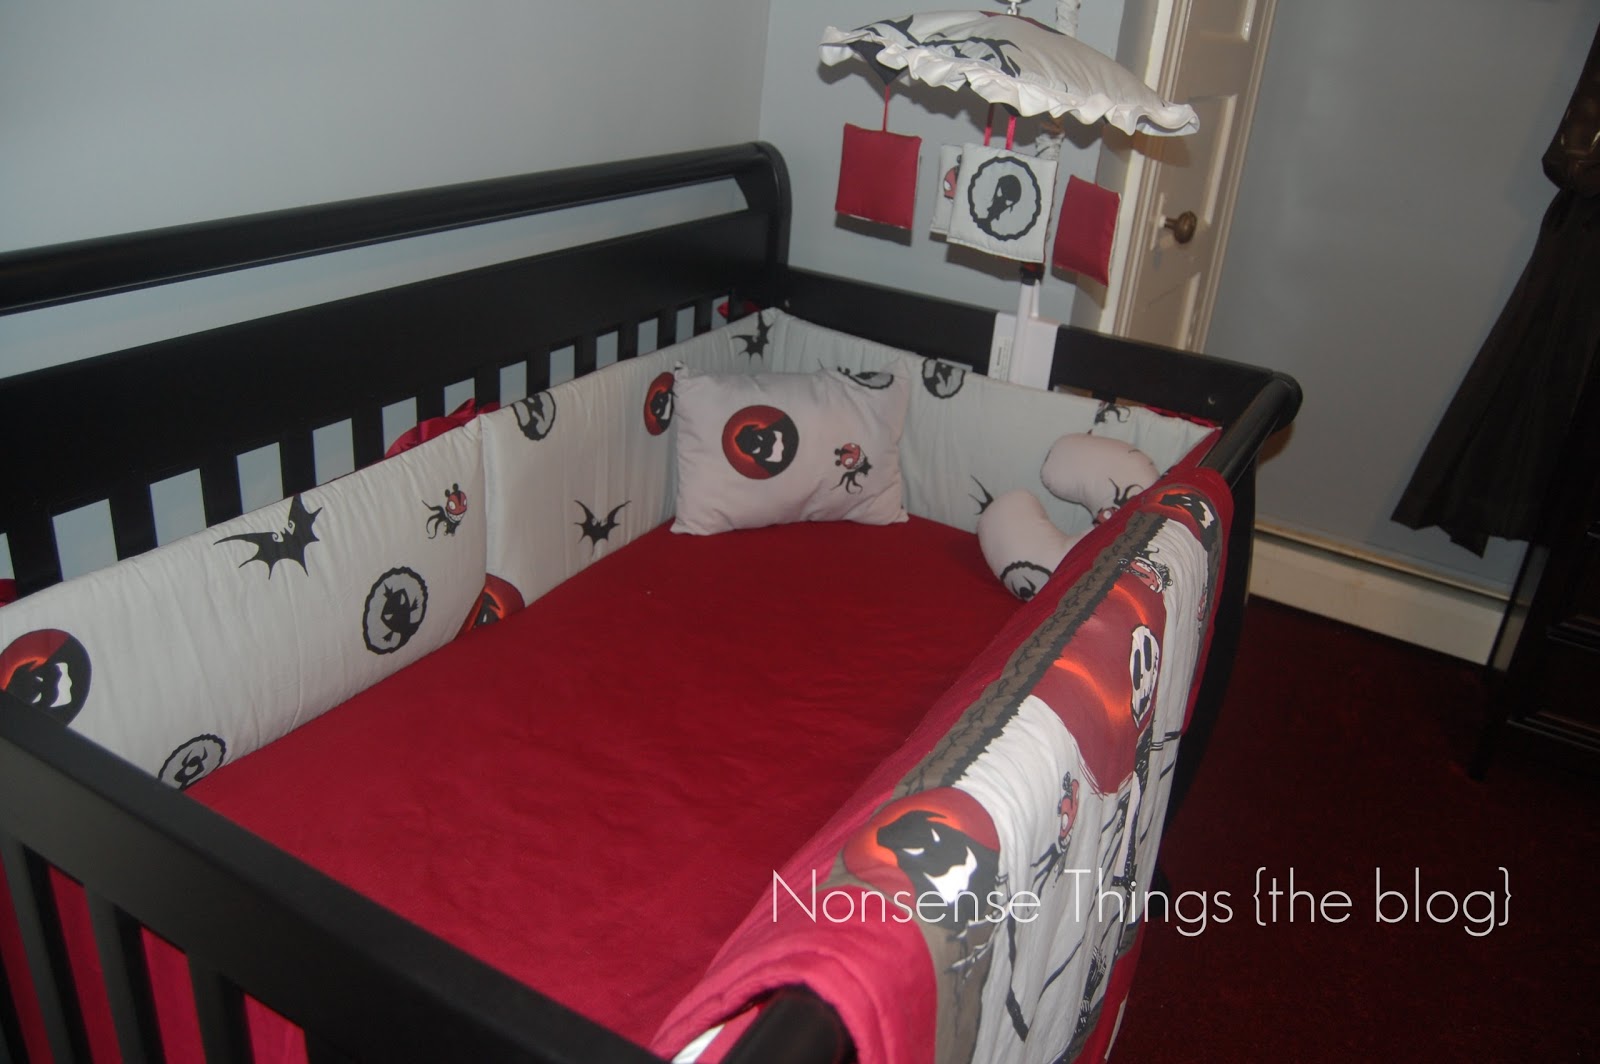 ... nursery sets and that is where I got the crib bedding, mobile, hamper